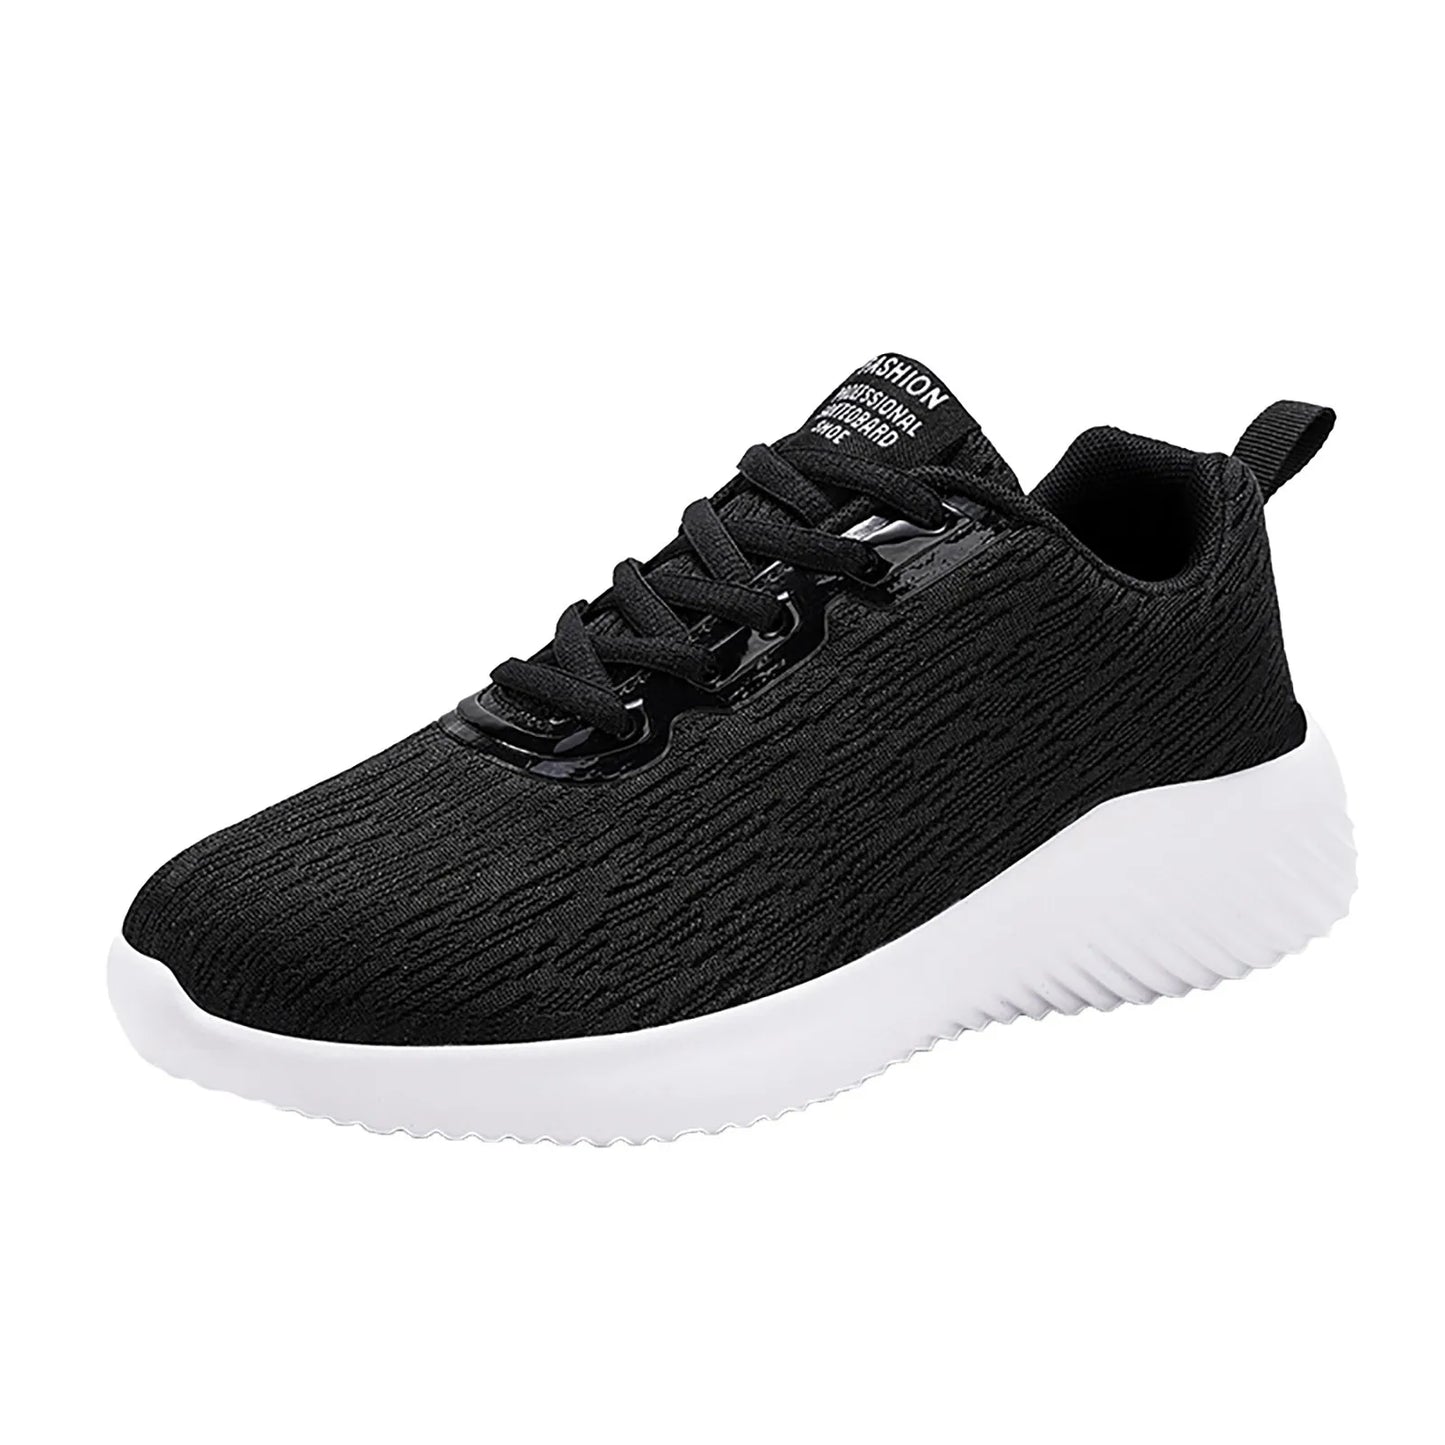 Sneakers Shoes Men Mesh Sport Shoes Lace Up Solid Color/Running Breathable Sneakers Thick Sole Platform Men's Sneakers